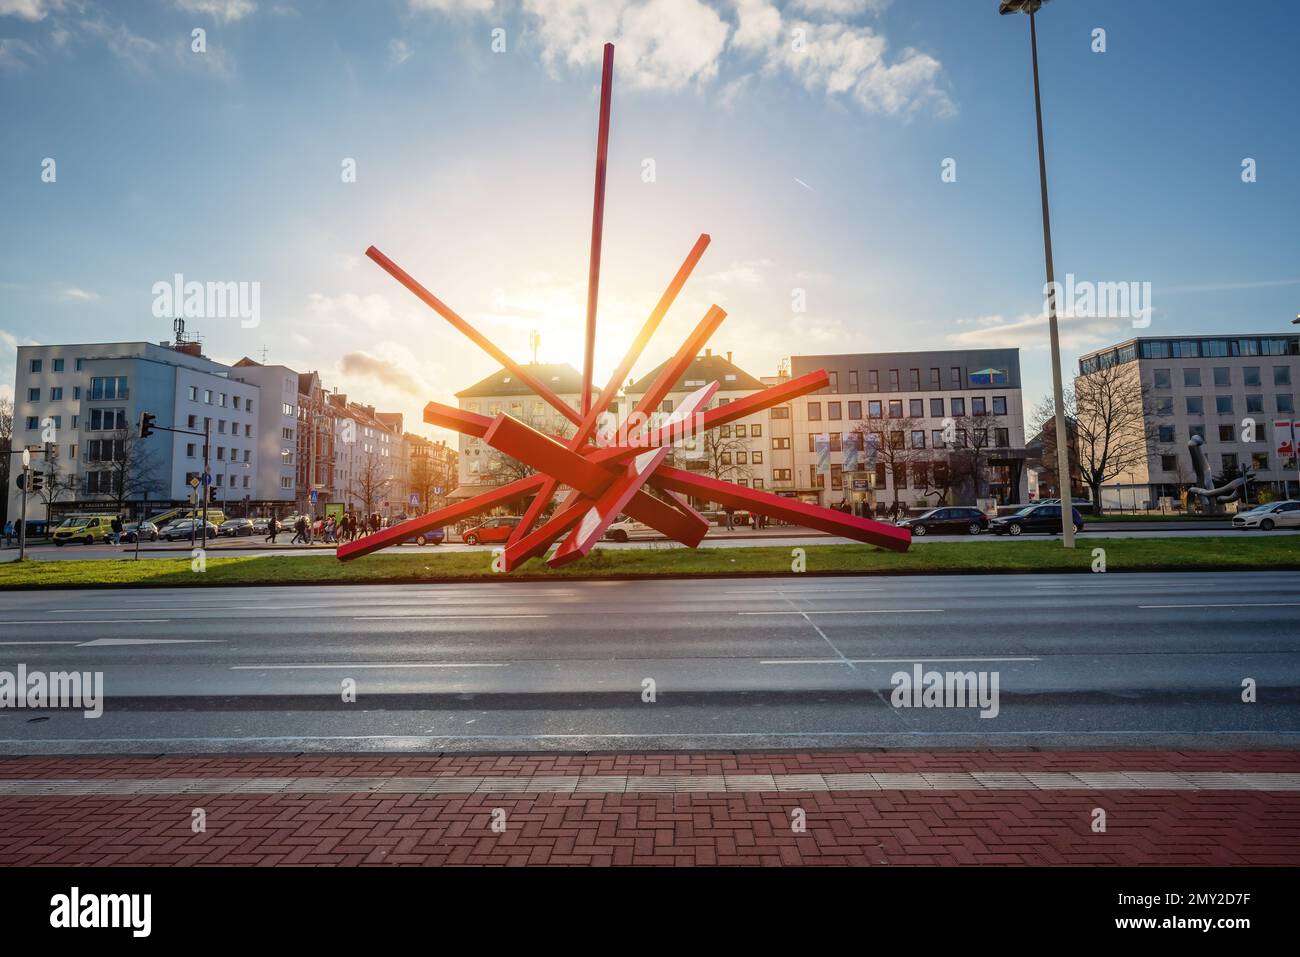 Symphony in Red Sculpture by John Raymond Henry - Hanover, Lower Saxony, Germany Stock Photo